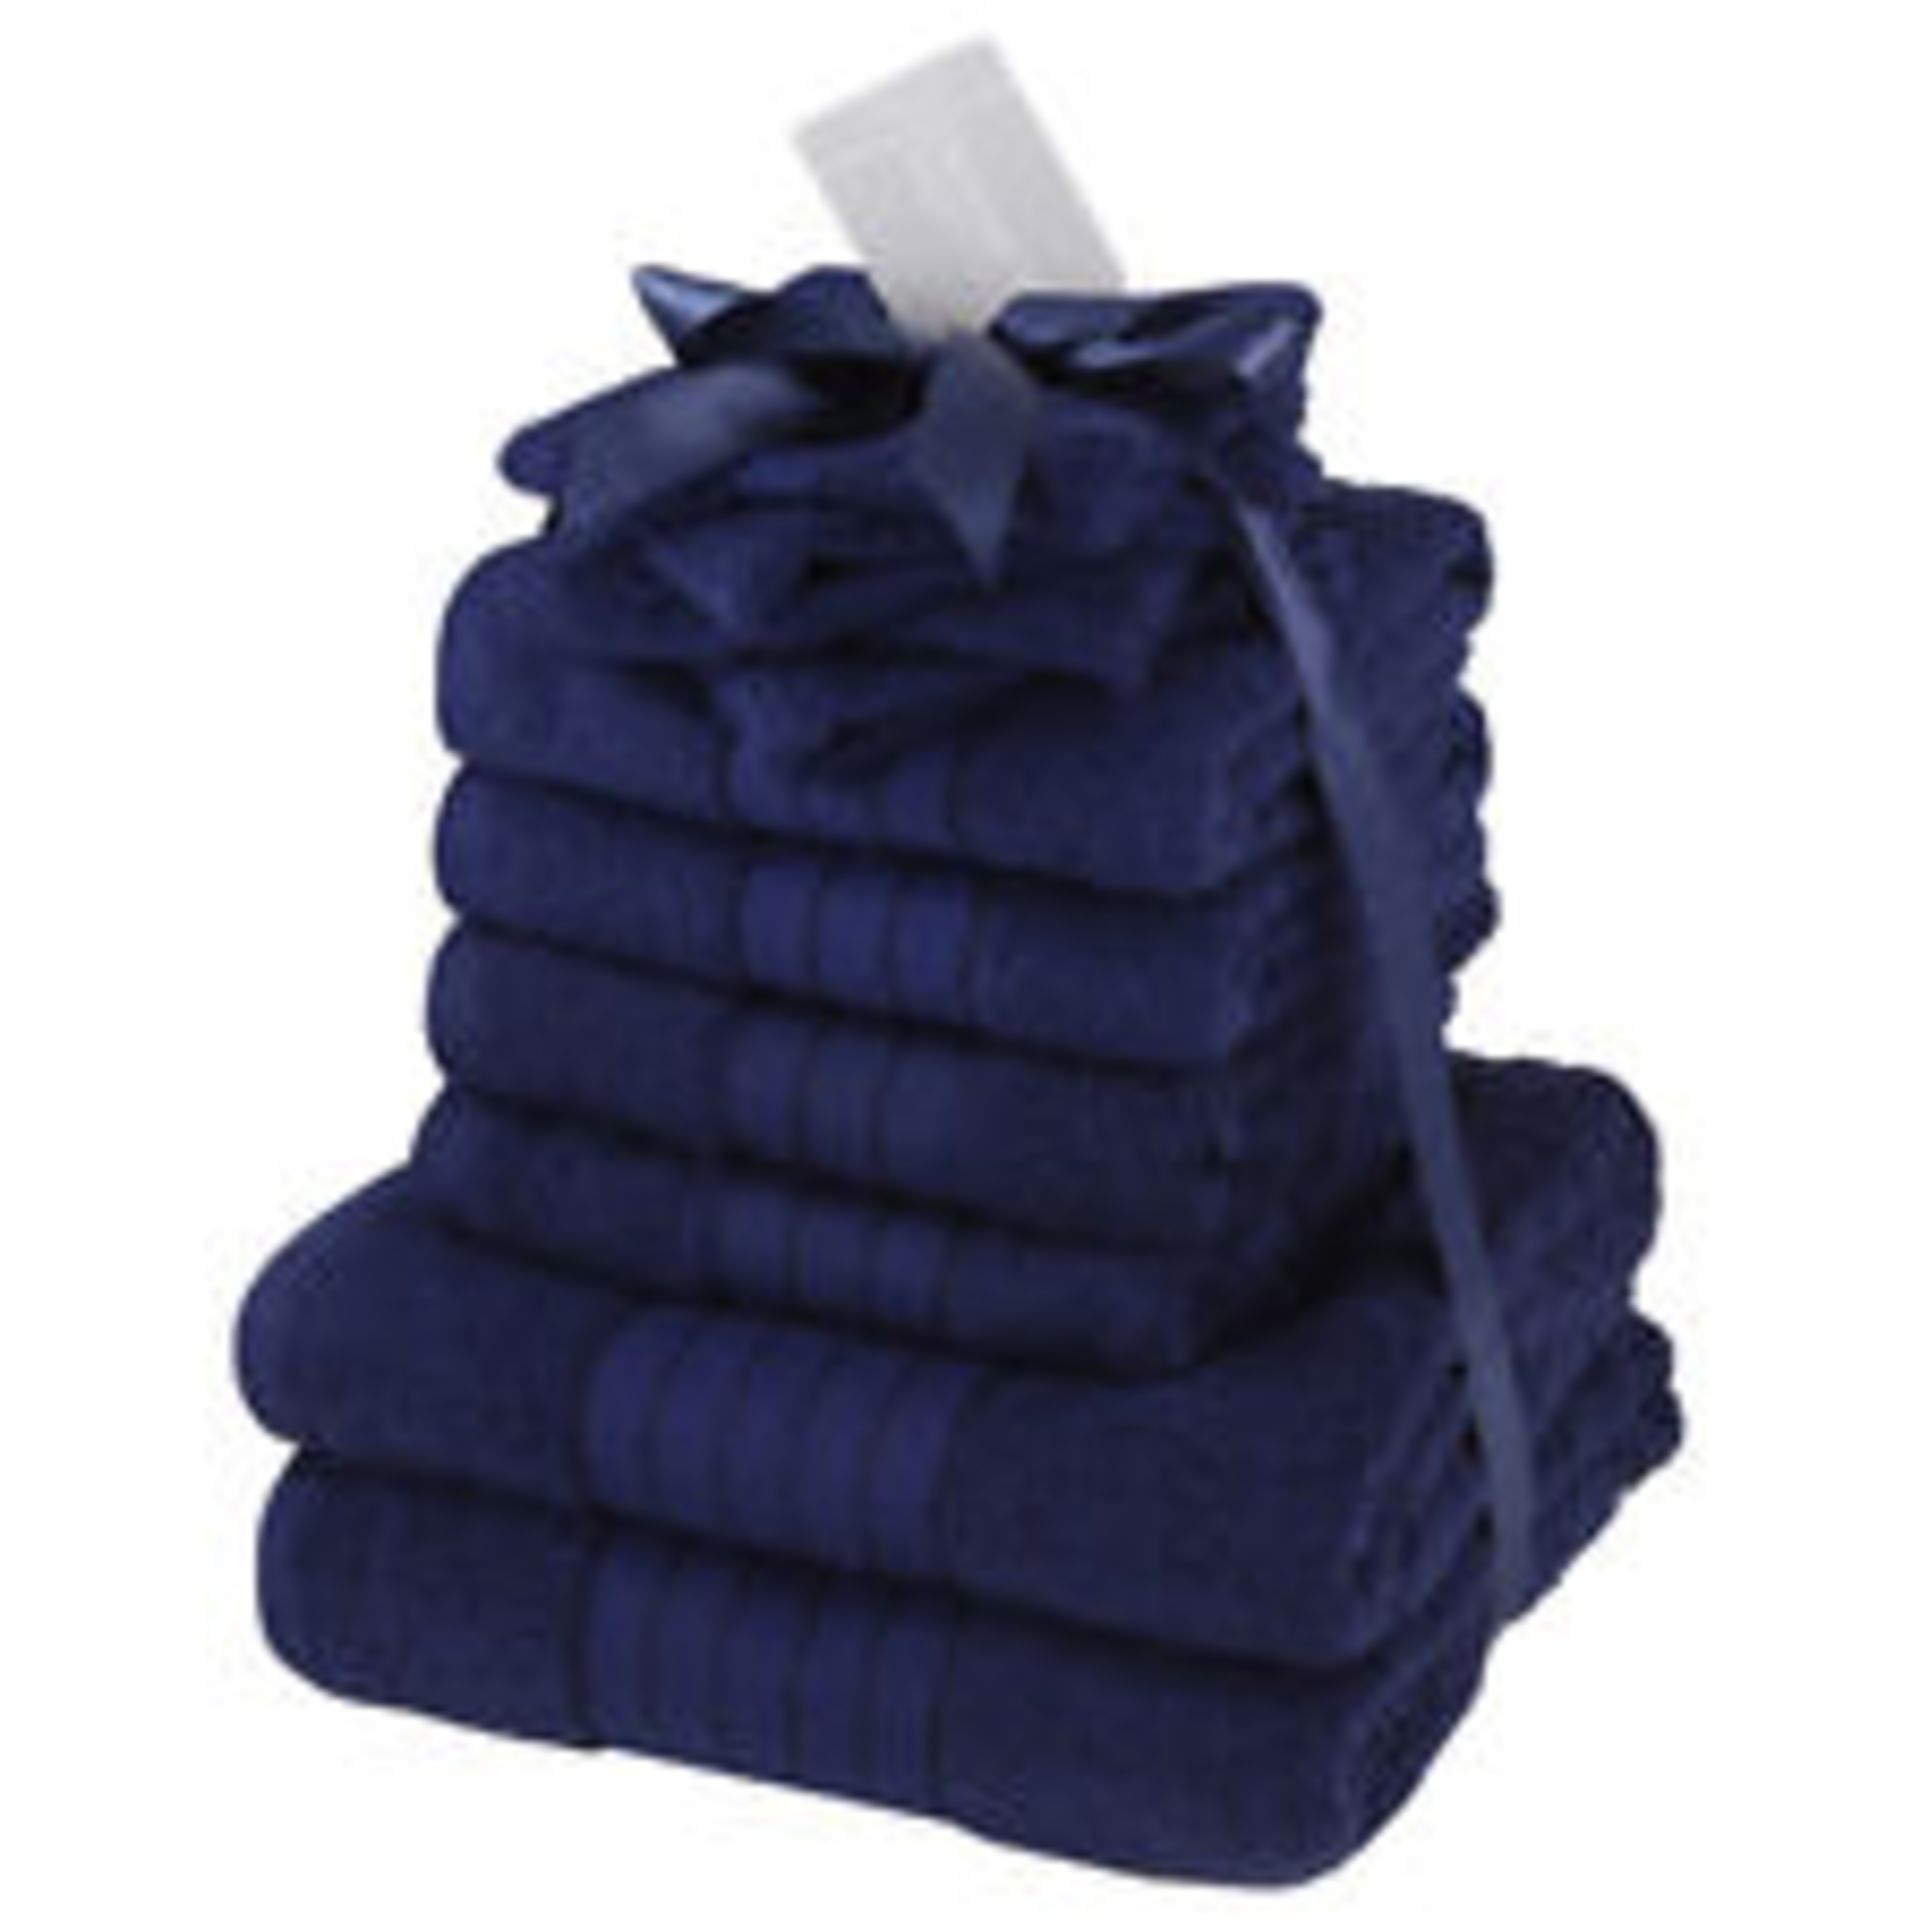 V Brand New Luxury 6 Piece Towel Bale With Two Face Cloths - Two Hand Toweks And Two Bath Towels